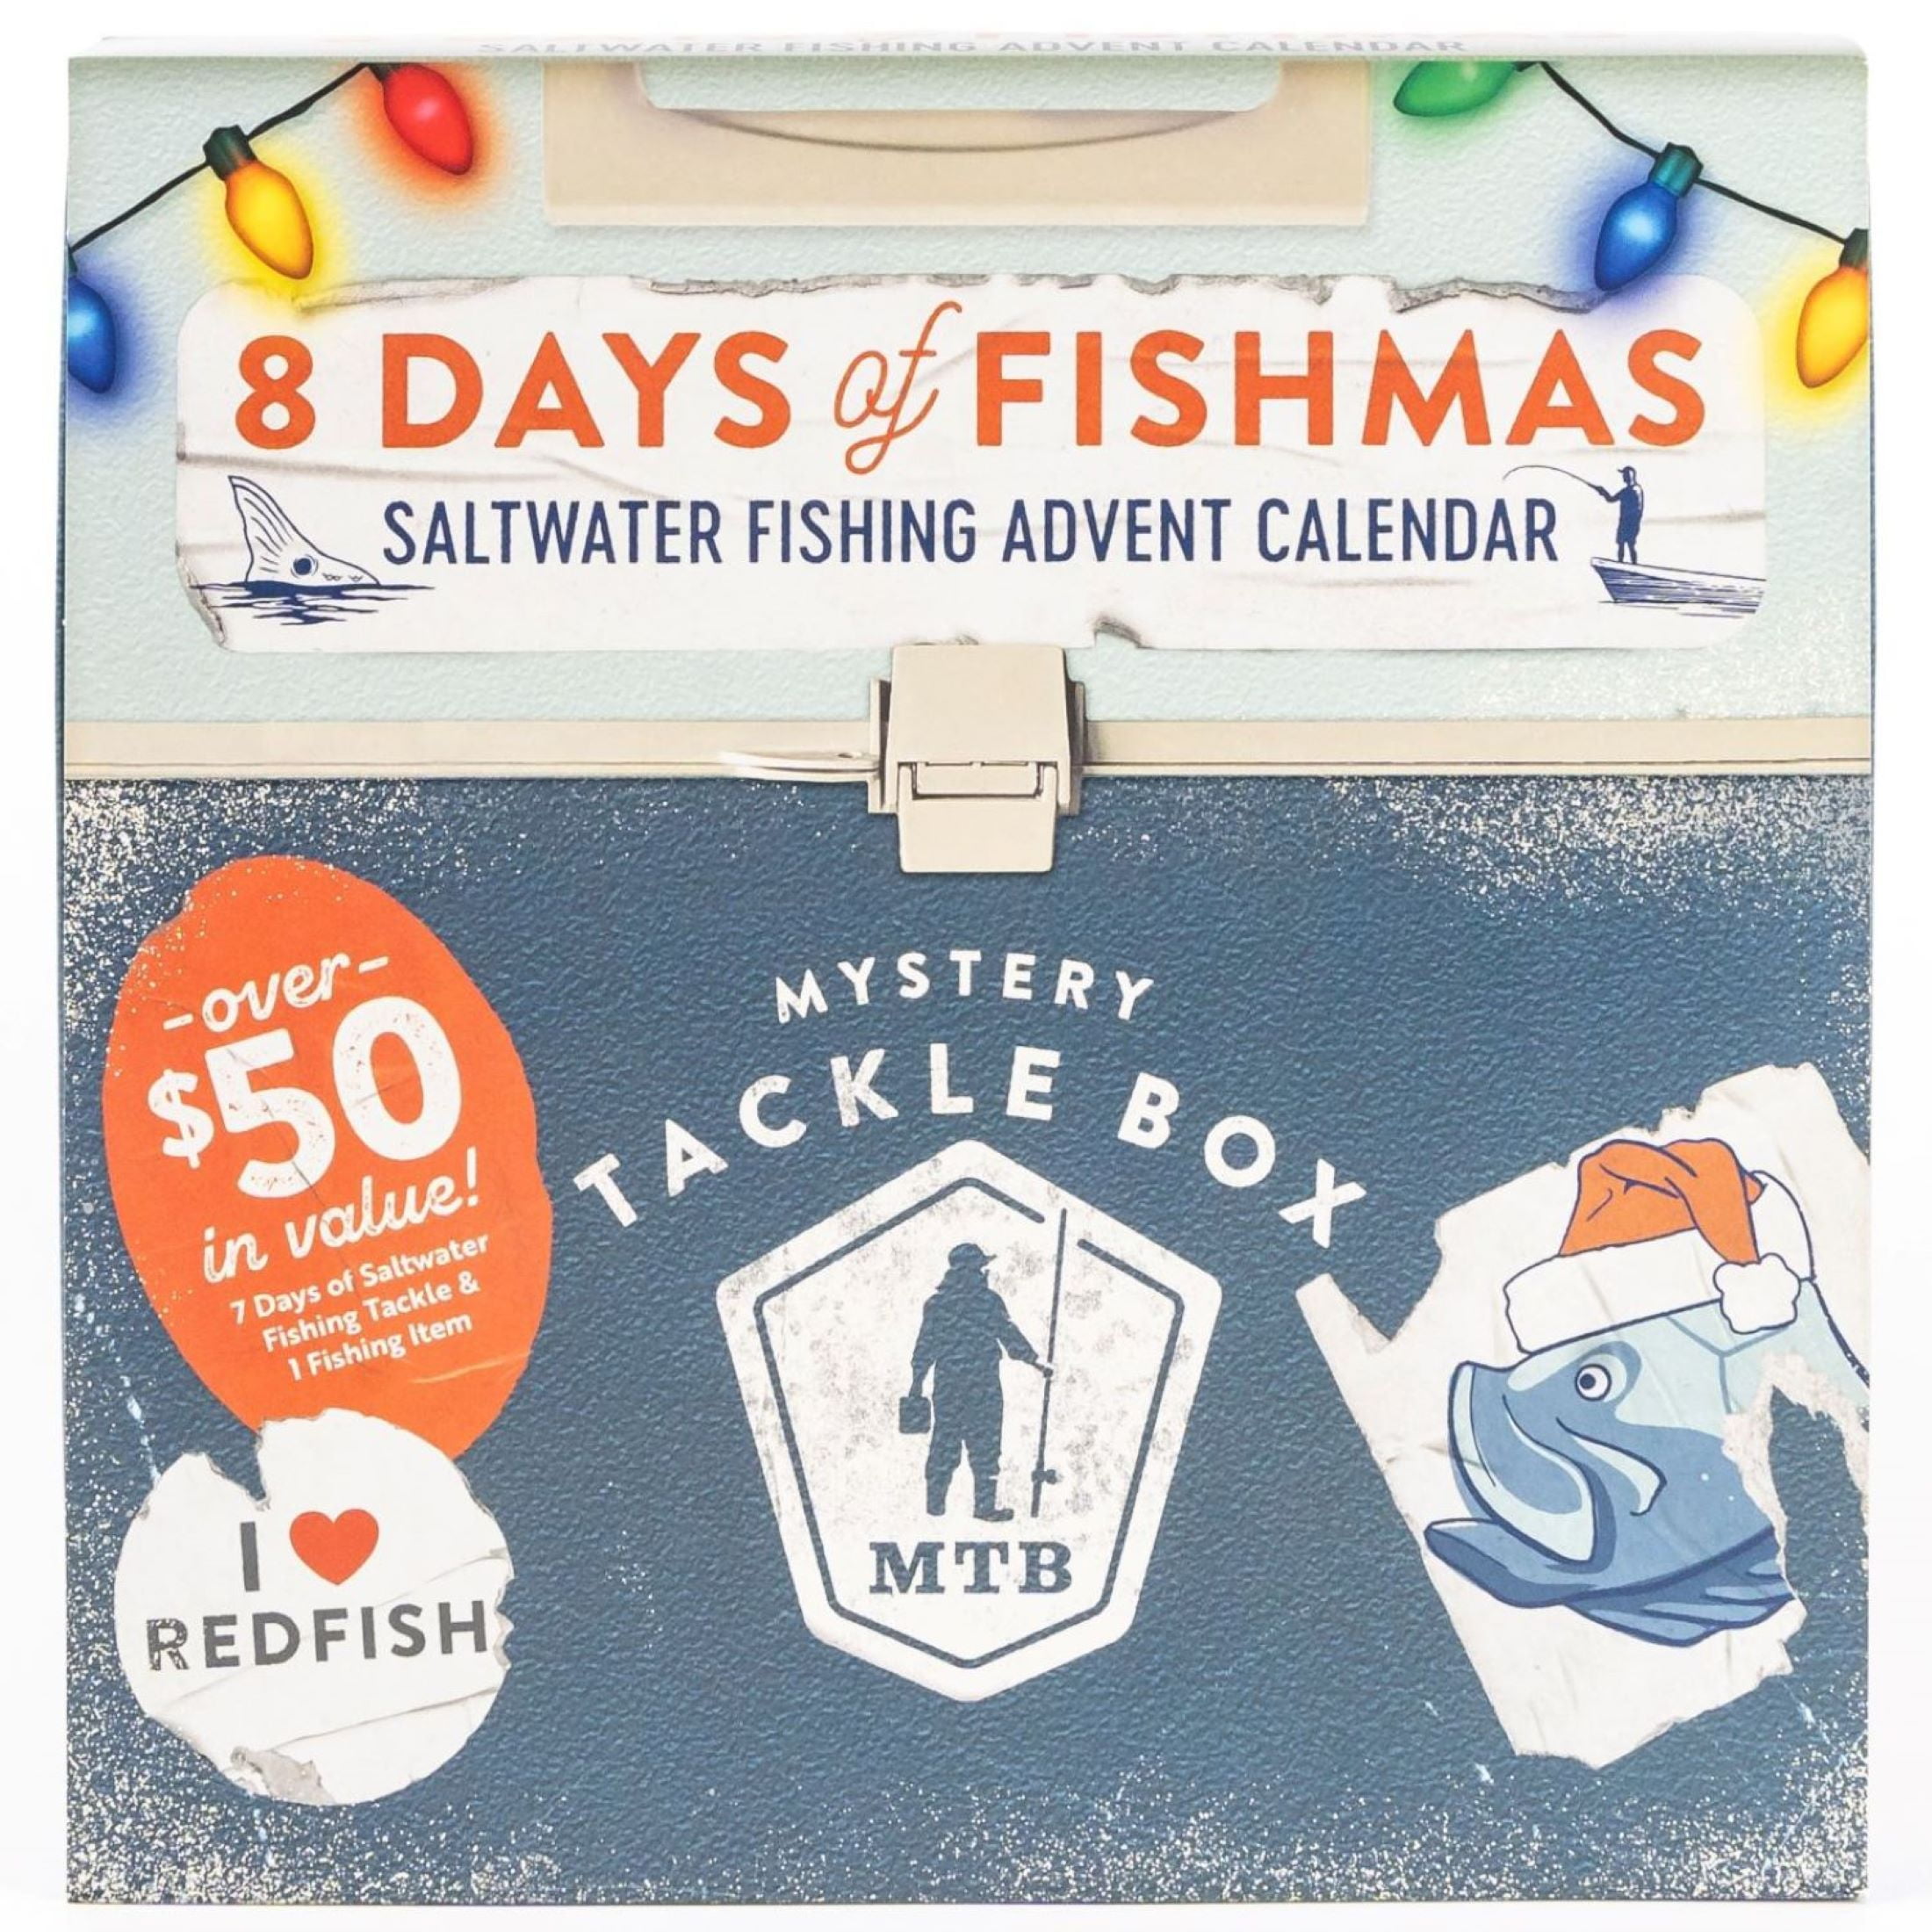 Fishing w/ MYSTERY TACKLE BOX 12 Days of Fishmas Advent Calendar!!!  (GIVEAWAY!) 